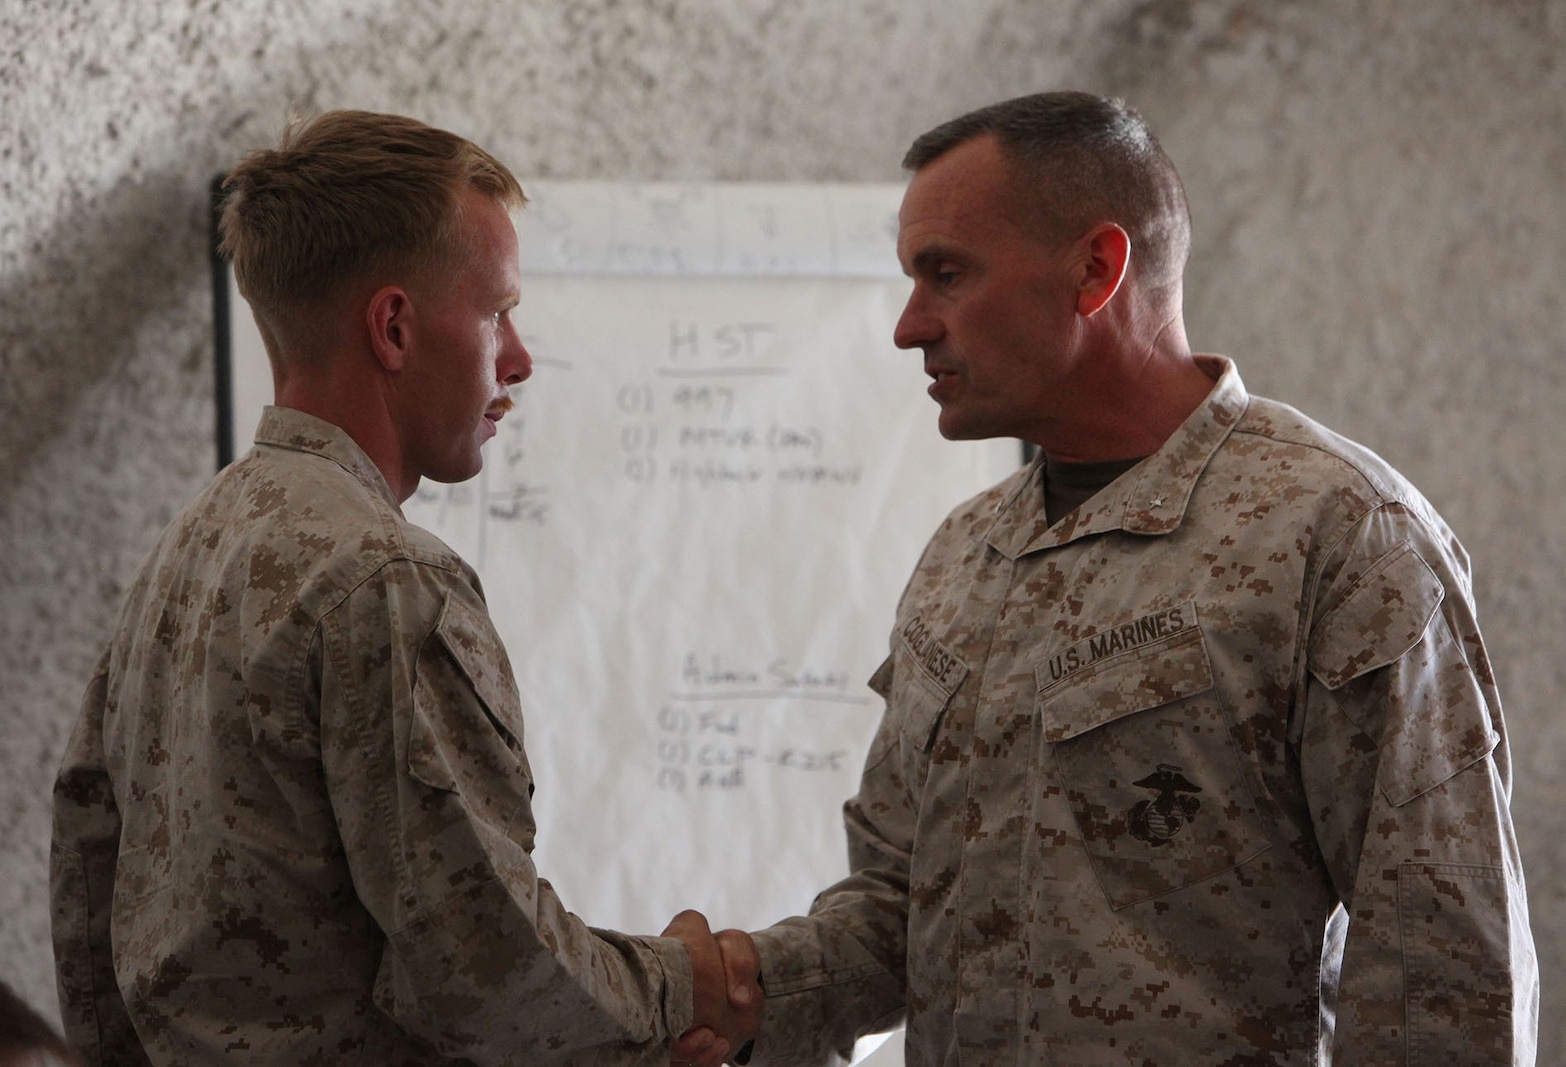 Brigadier Gen. Vincent A. Coglianese, commanding general of 1st Marine Logistics Group, shakes hands with Cpl. Thomas Evans, a squad leader with Combat Logistics Battalion 11, Combat Logistics Regiment 17, 1st MLG, for his hard work and discipline as squad leader at Marine Corps Air Ground Combat Center, Calif., Aug. 9, 2013. Coglianese came aboard MCAGCC to observe the battalion’s field exercise. 